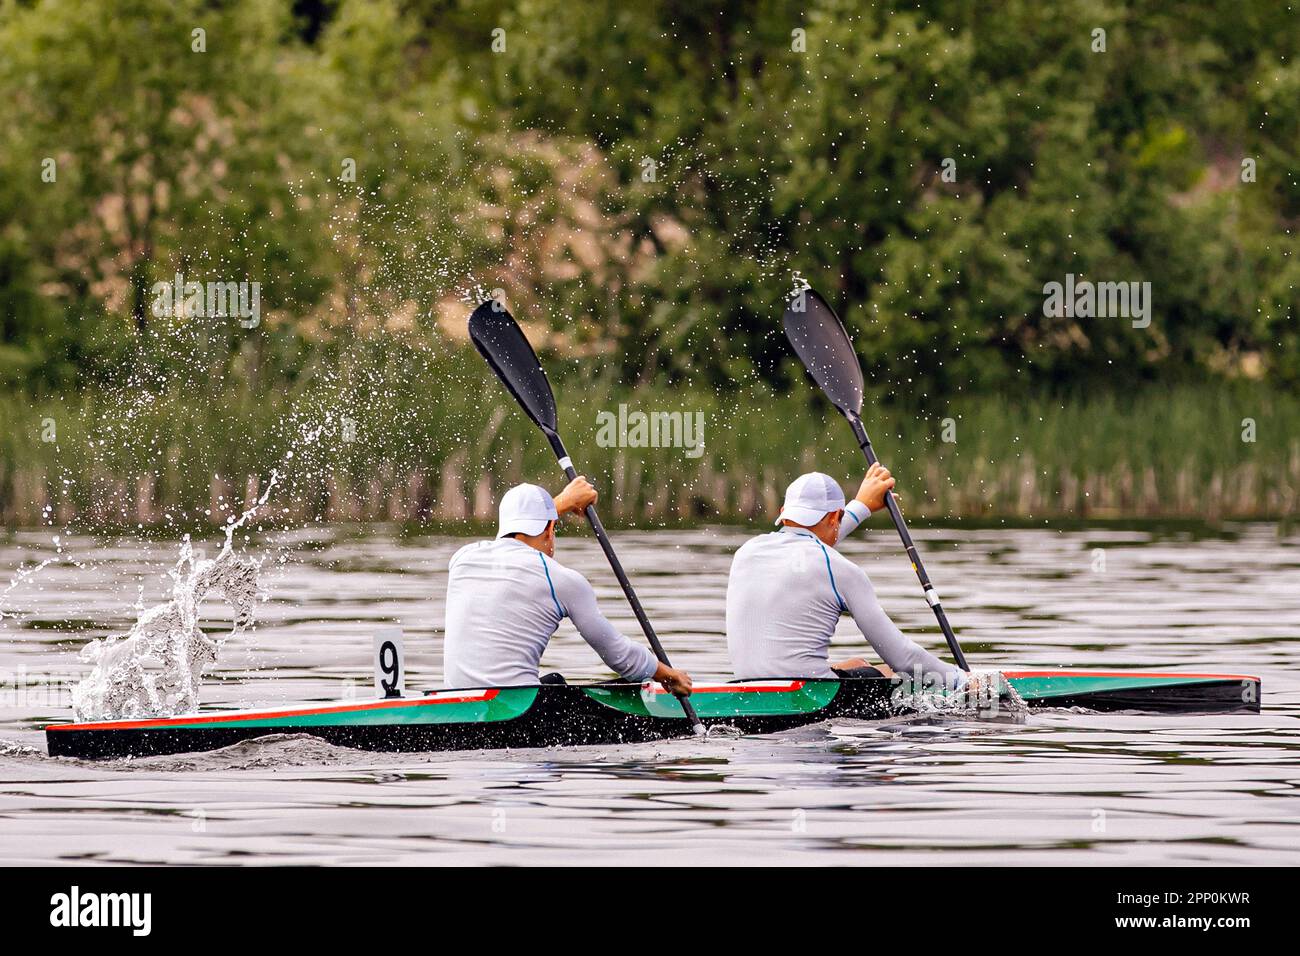 side view male kayakers on kayak double in kayaking competition race, water splashes from paddles Stock Photo